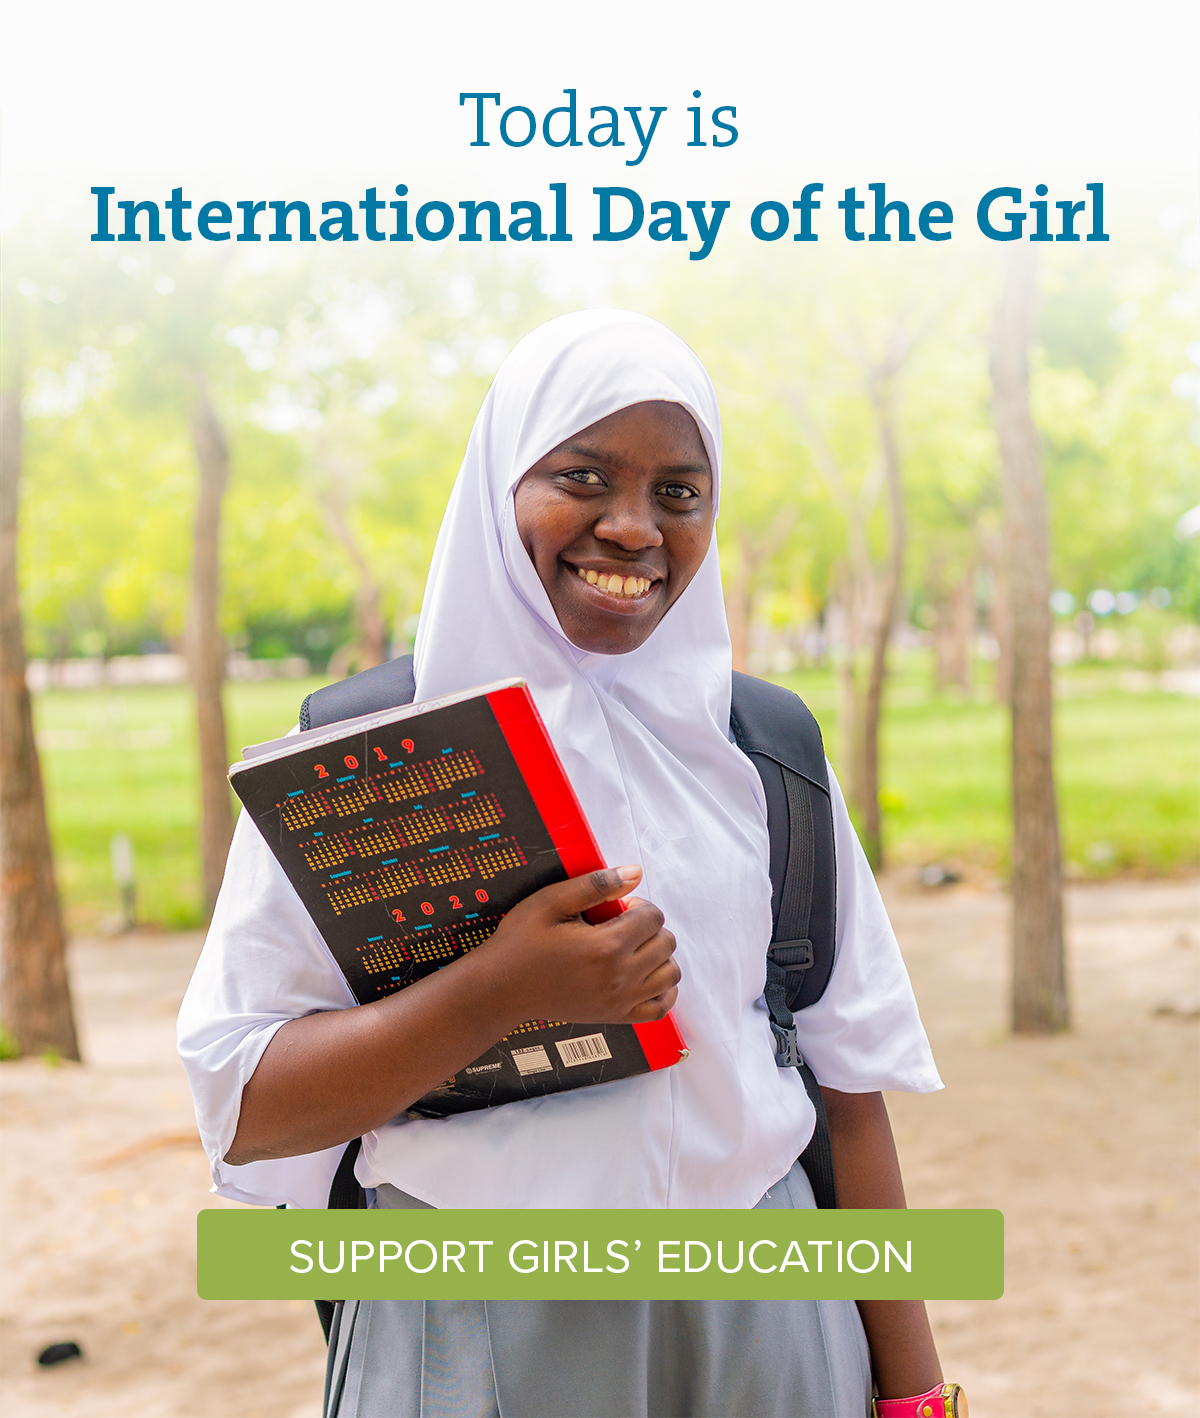 Today is International Day of the Girl